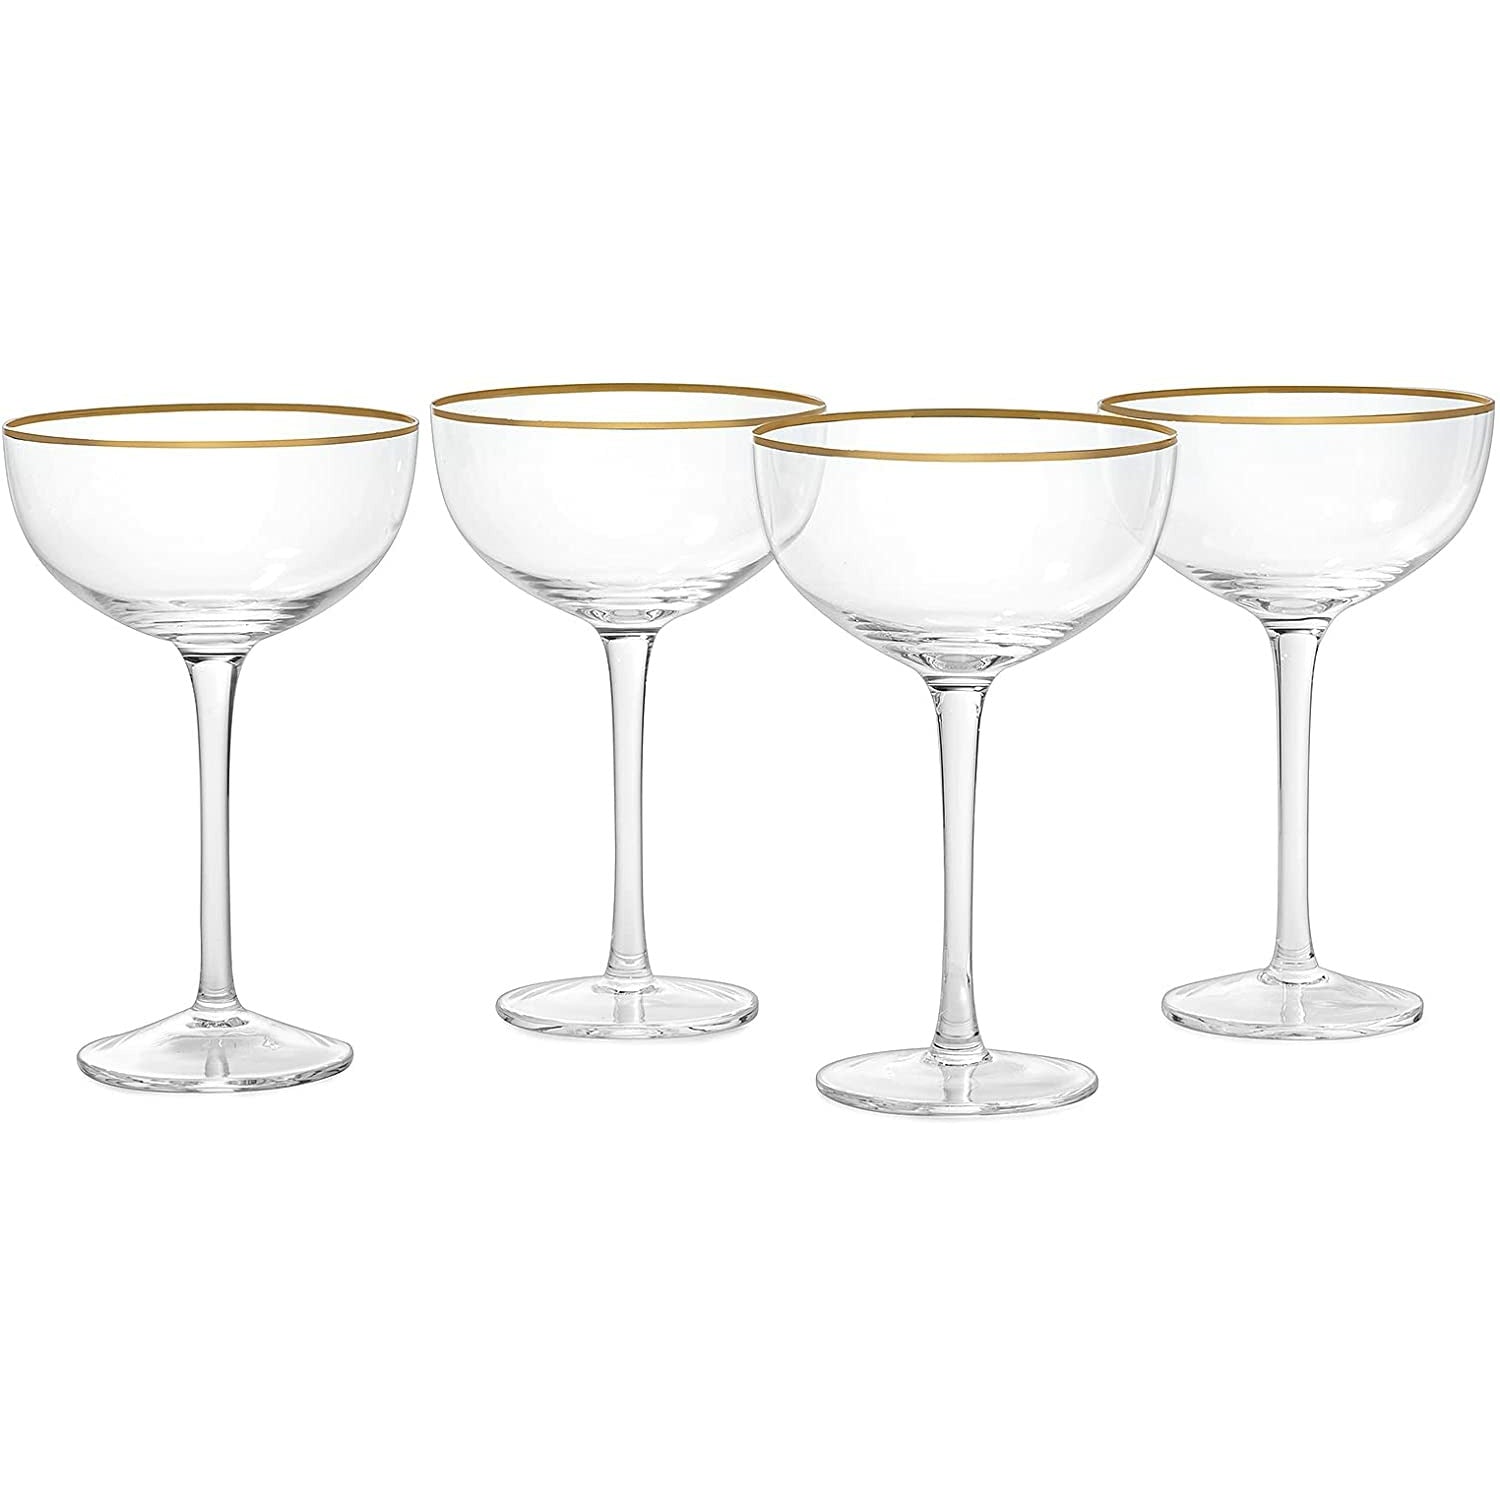 Vintage Art Deco Coupe Glasses | Set of 4 | 7 oz Classic Cocktail Glassware  for Champagne, Martini, …See more Vintage Art Deco Coupe Glasses | Set of